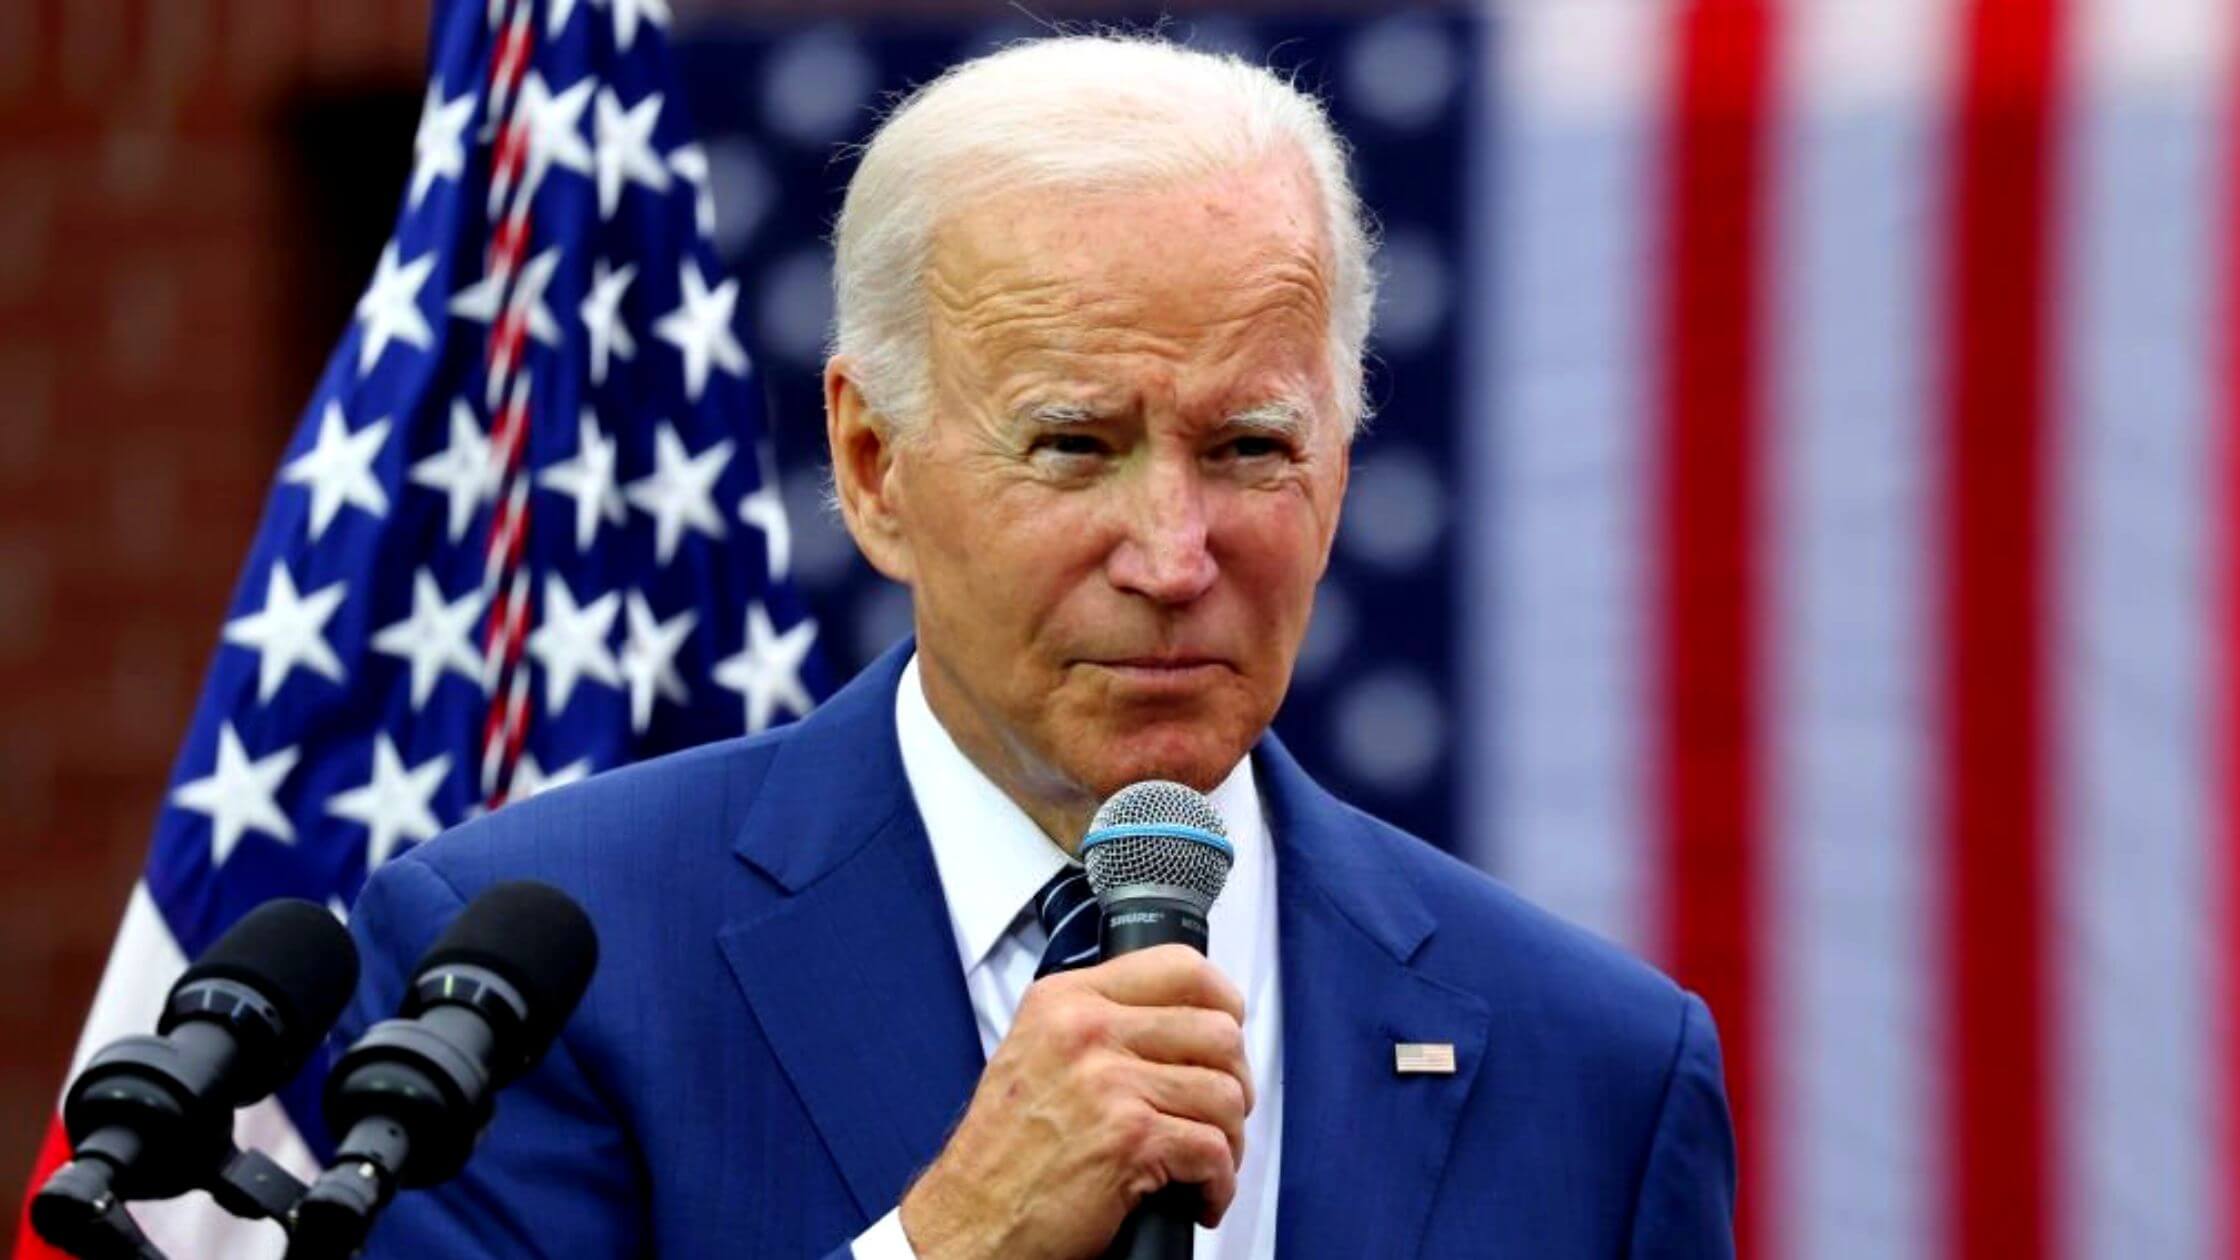 Biden Portrays The Midterm Elections As A Defining Moment For American Democracy